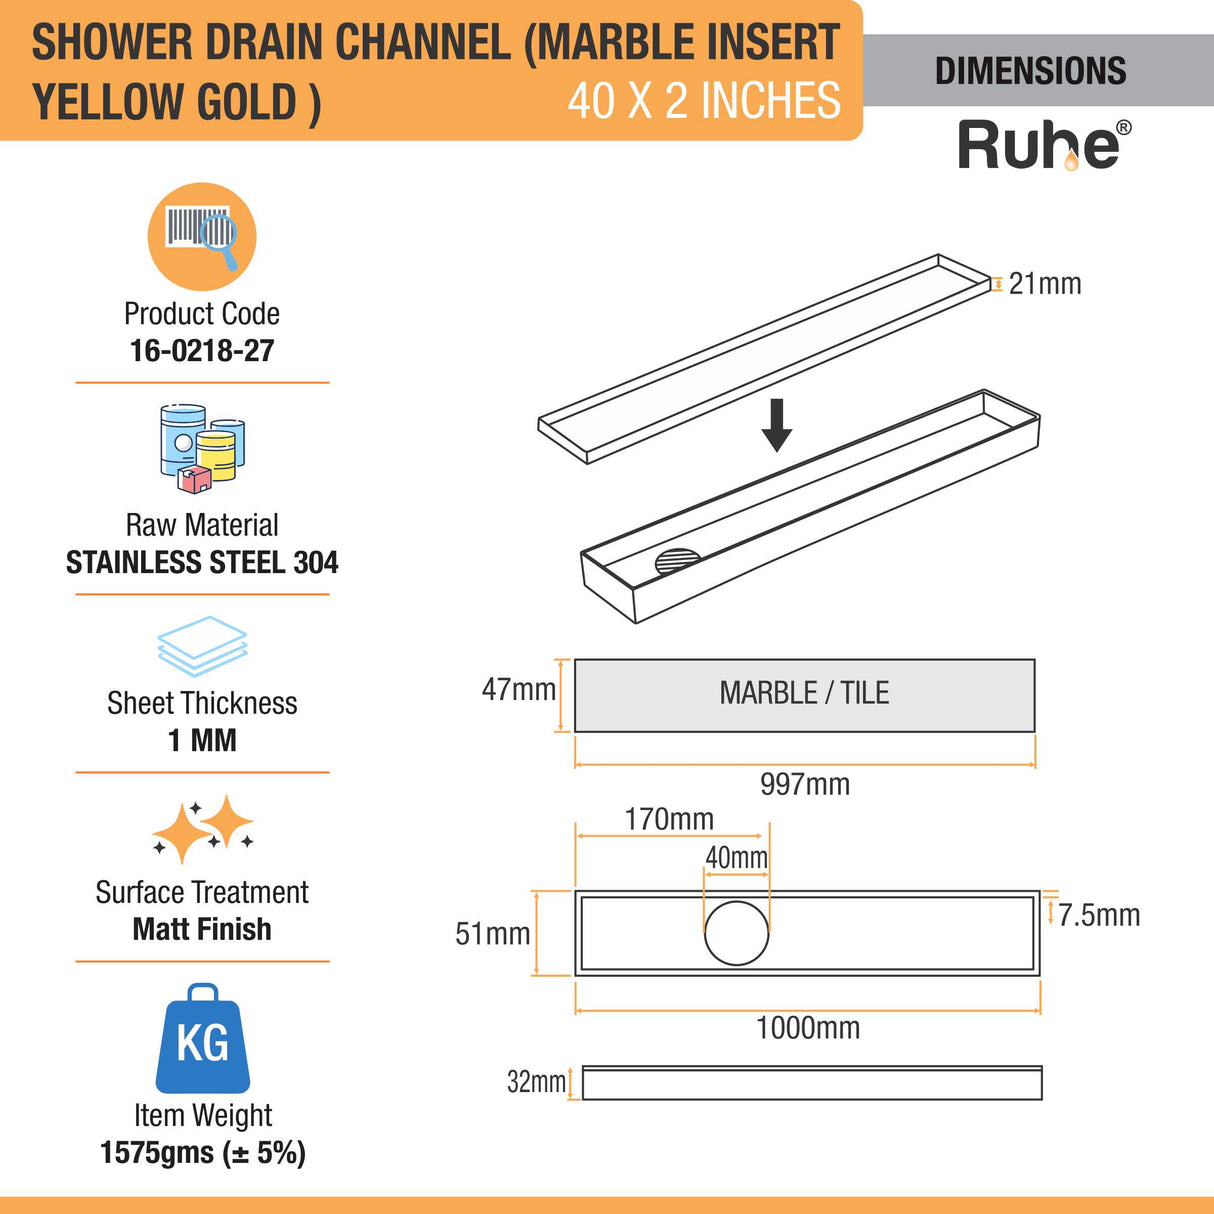 Marble Insert Shower Drain Channel (40 x 2 Inches) YELLOW GOLD dimensions and size